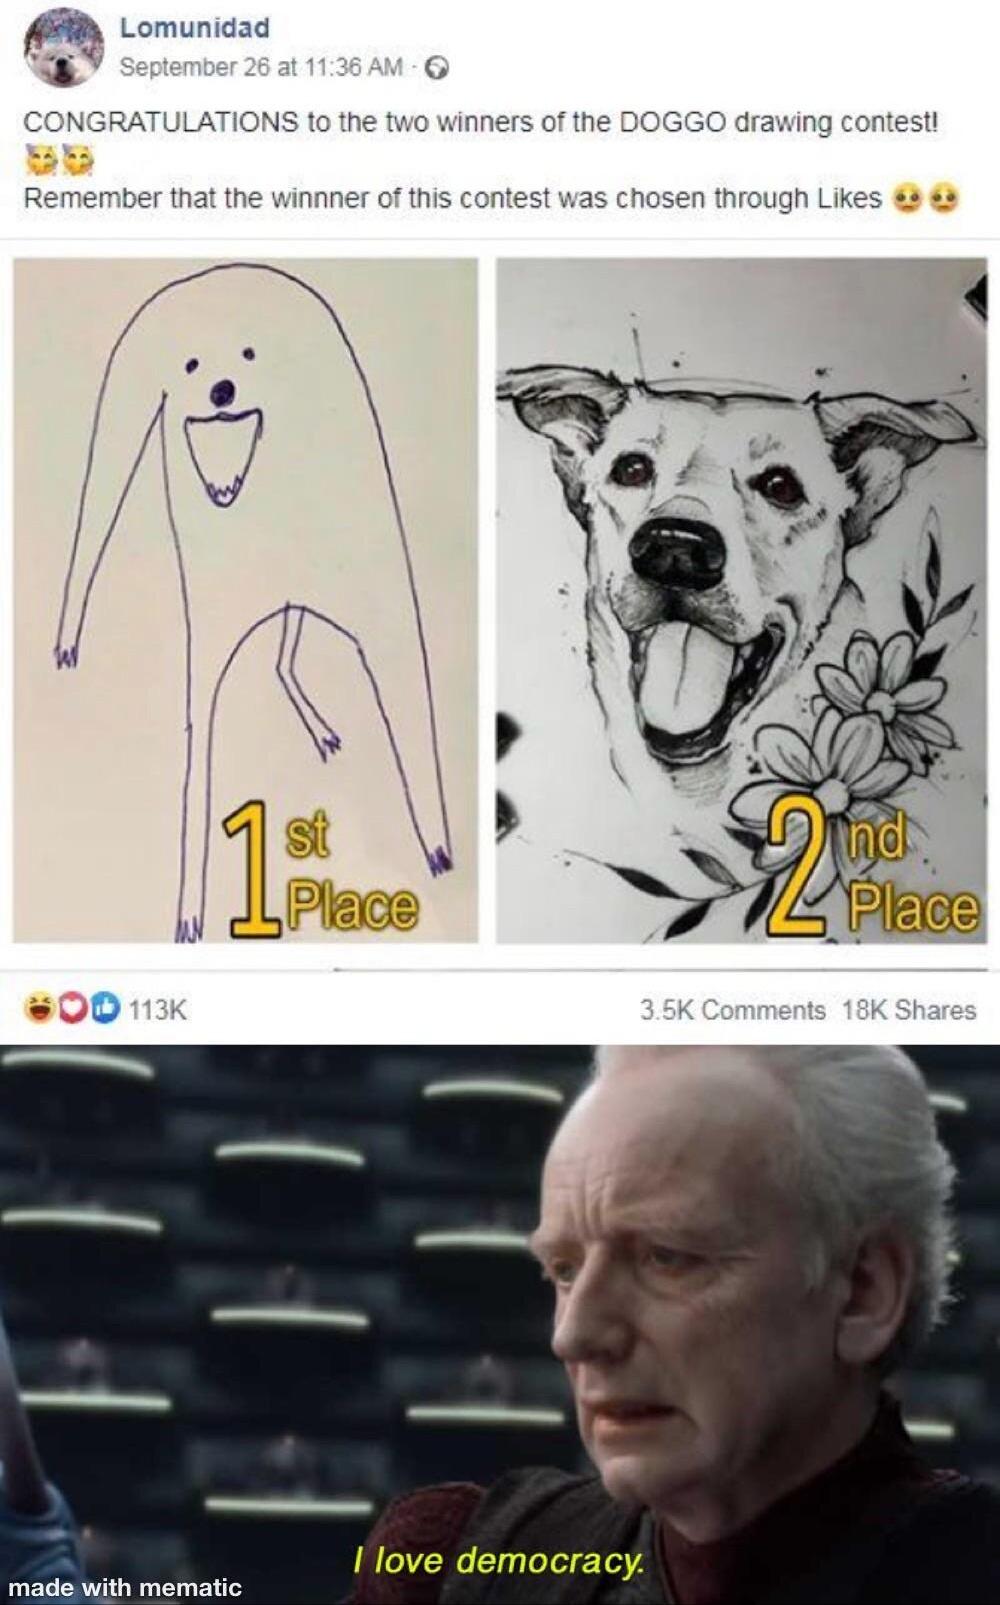 Congratulations to the two winners of the Doggo drawing contest! Remember that the winner of this contest was chosen through likes - I love democracy.